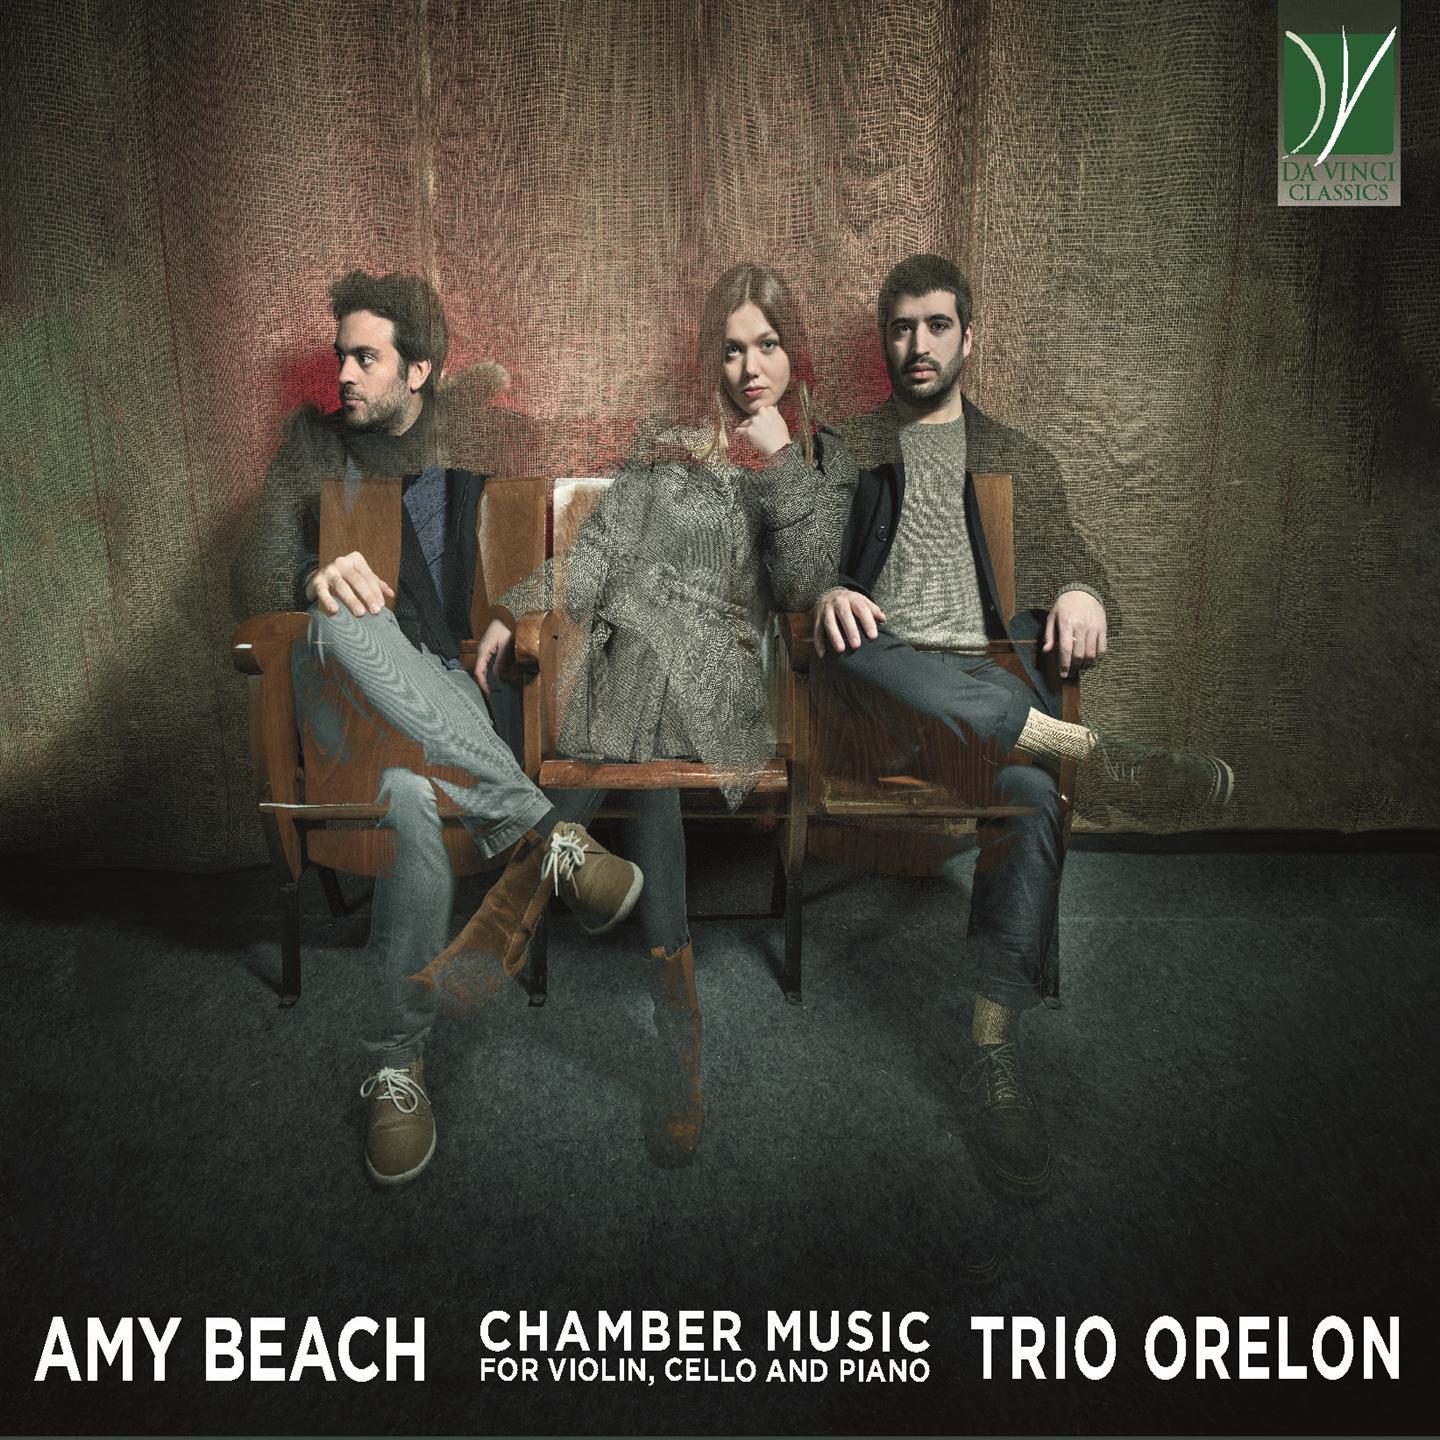 AMY BEACH: CHAMBER MUSIC FOR VIOLIN, CELLO AND PIANO